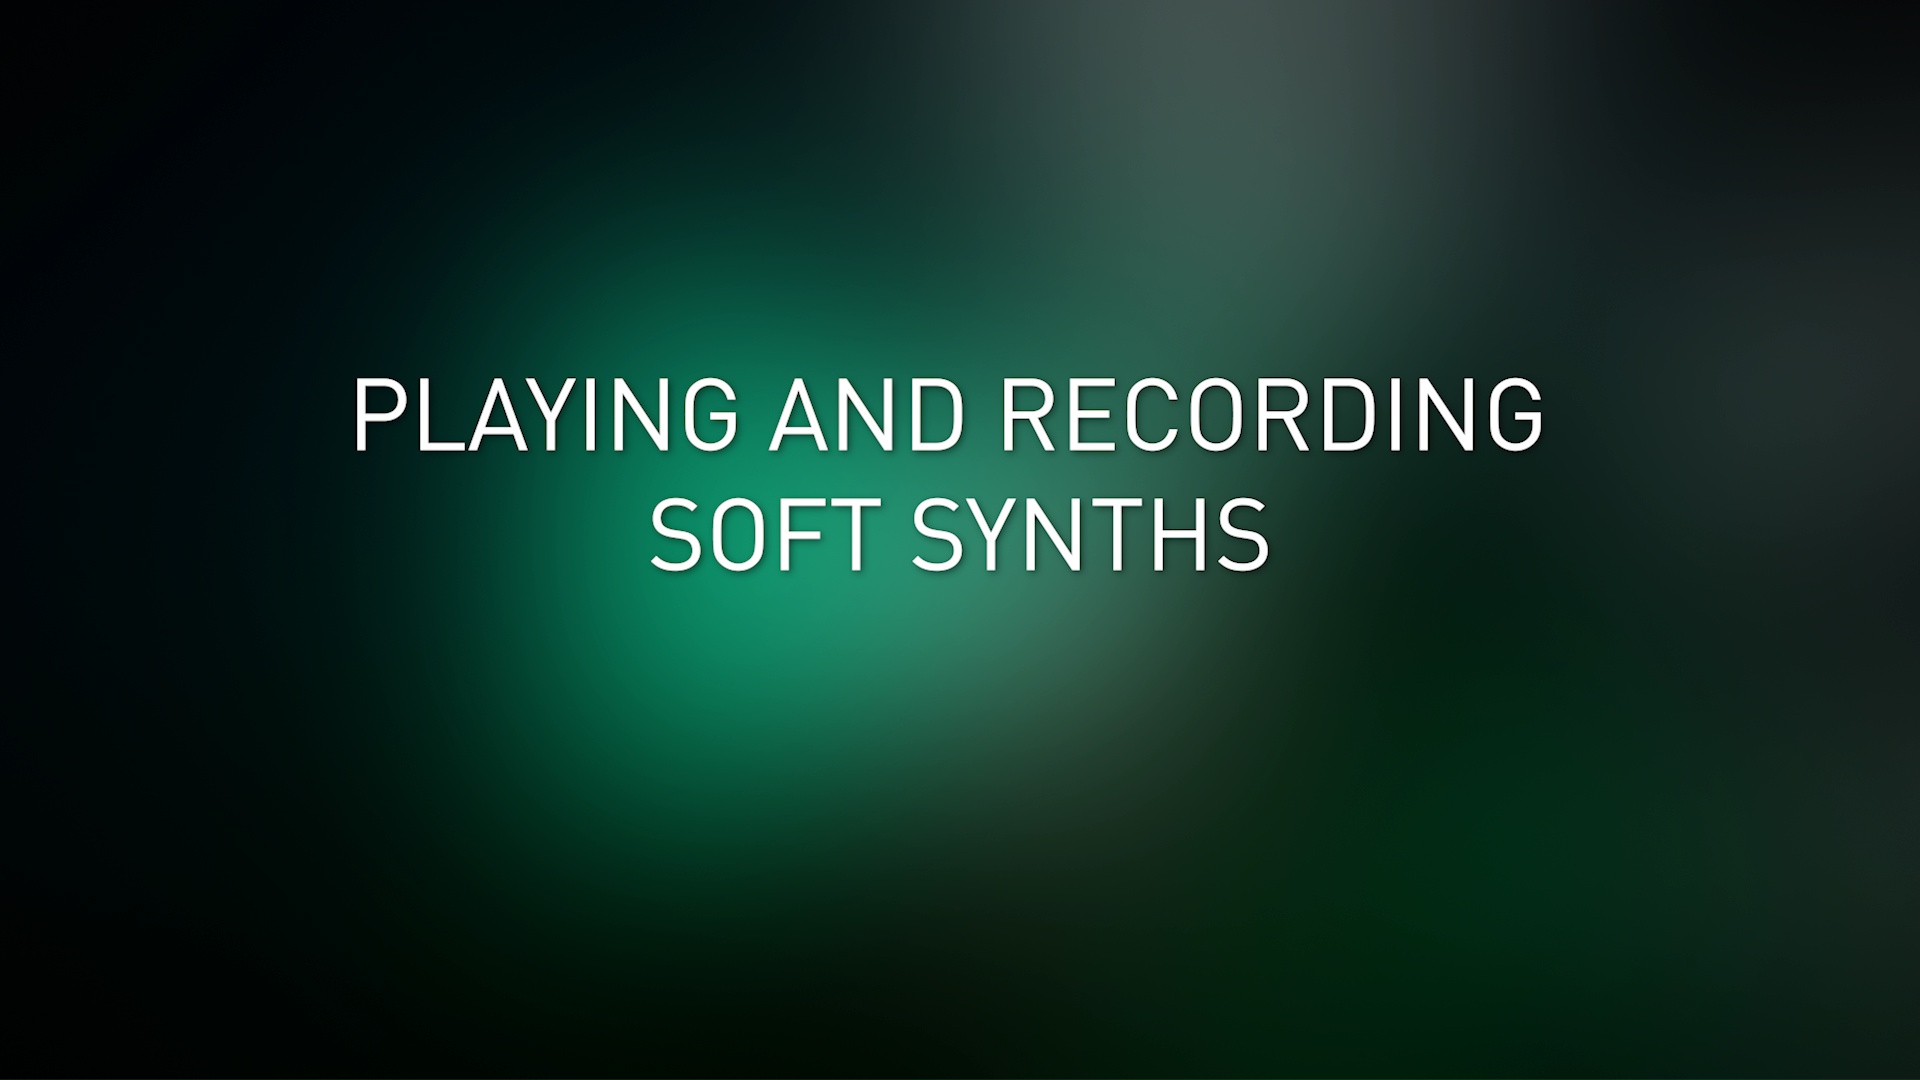 Playing and Recording Soft Synths